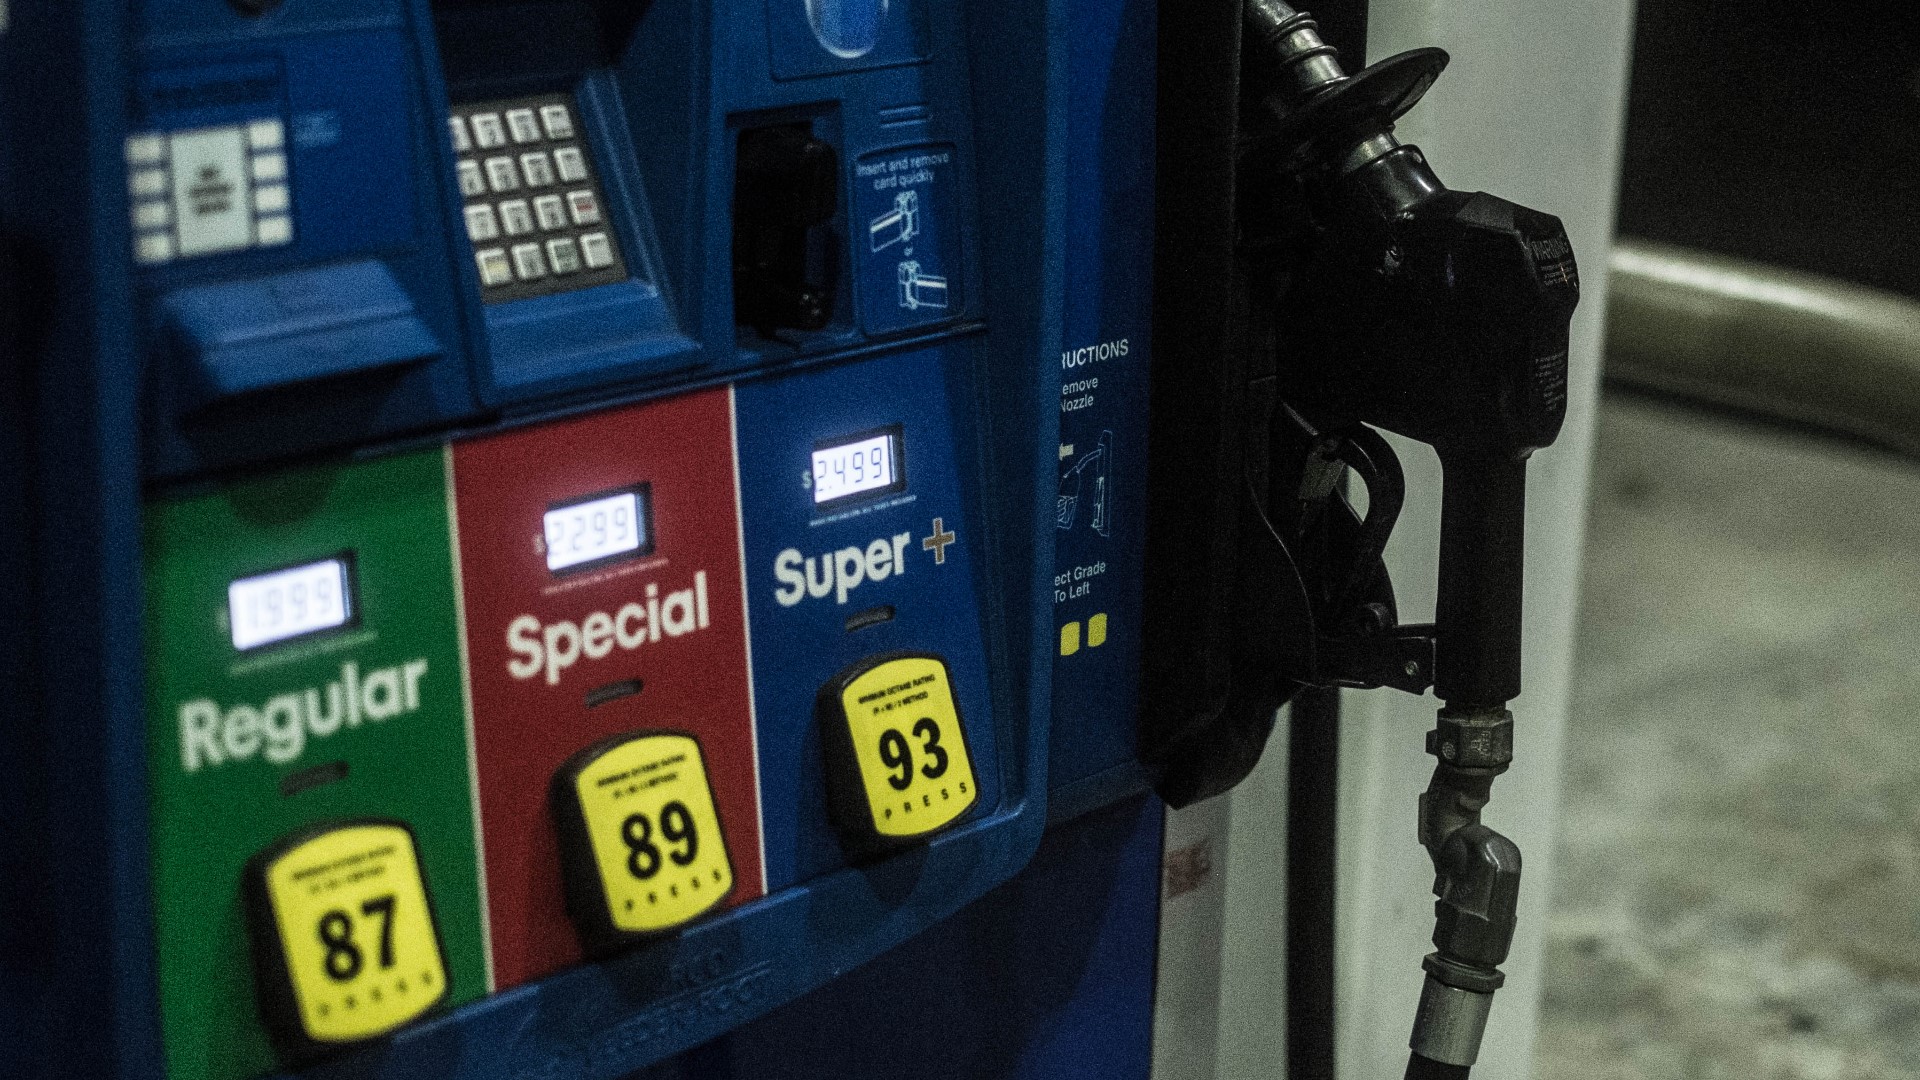 Gas prices continue to drop in the Great Lakes region and according to an expert gas analyst, could sink below $1 per gallon.